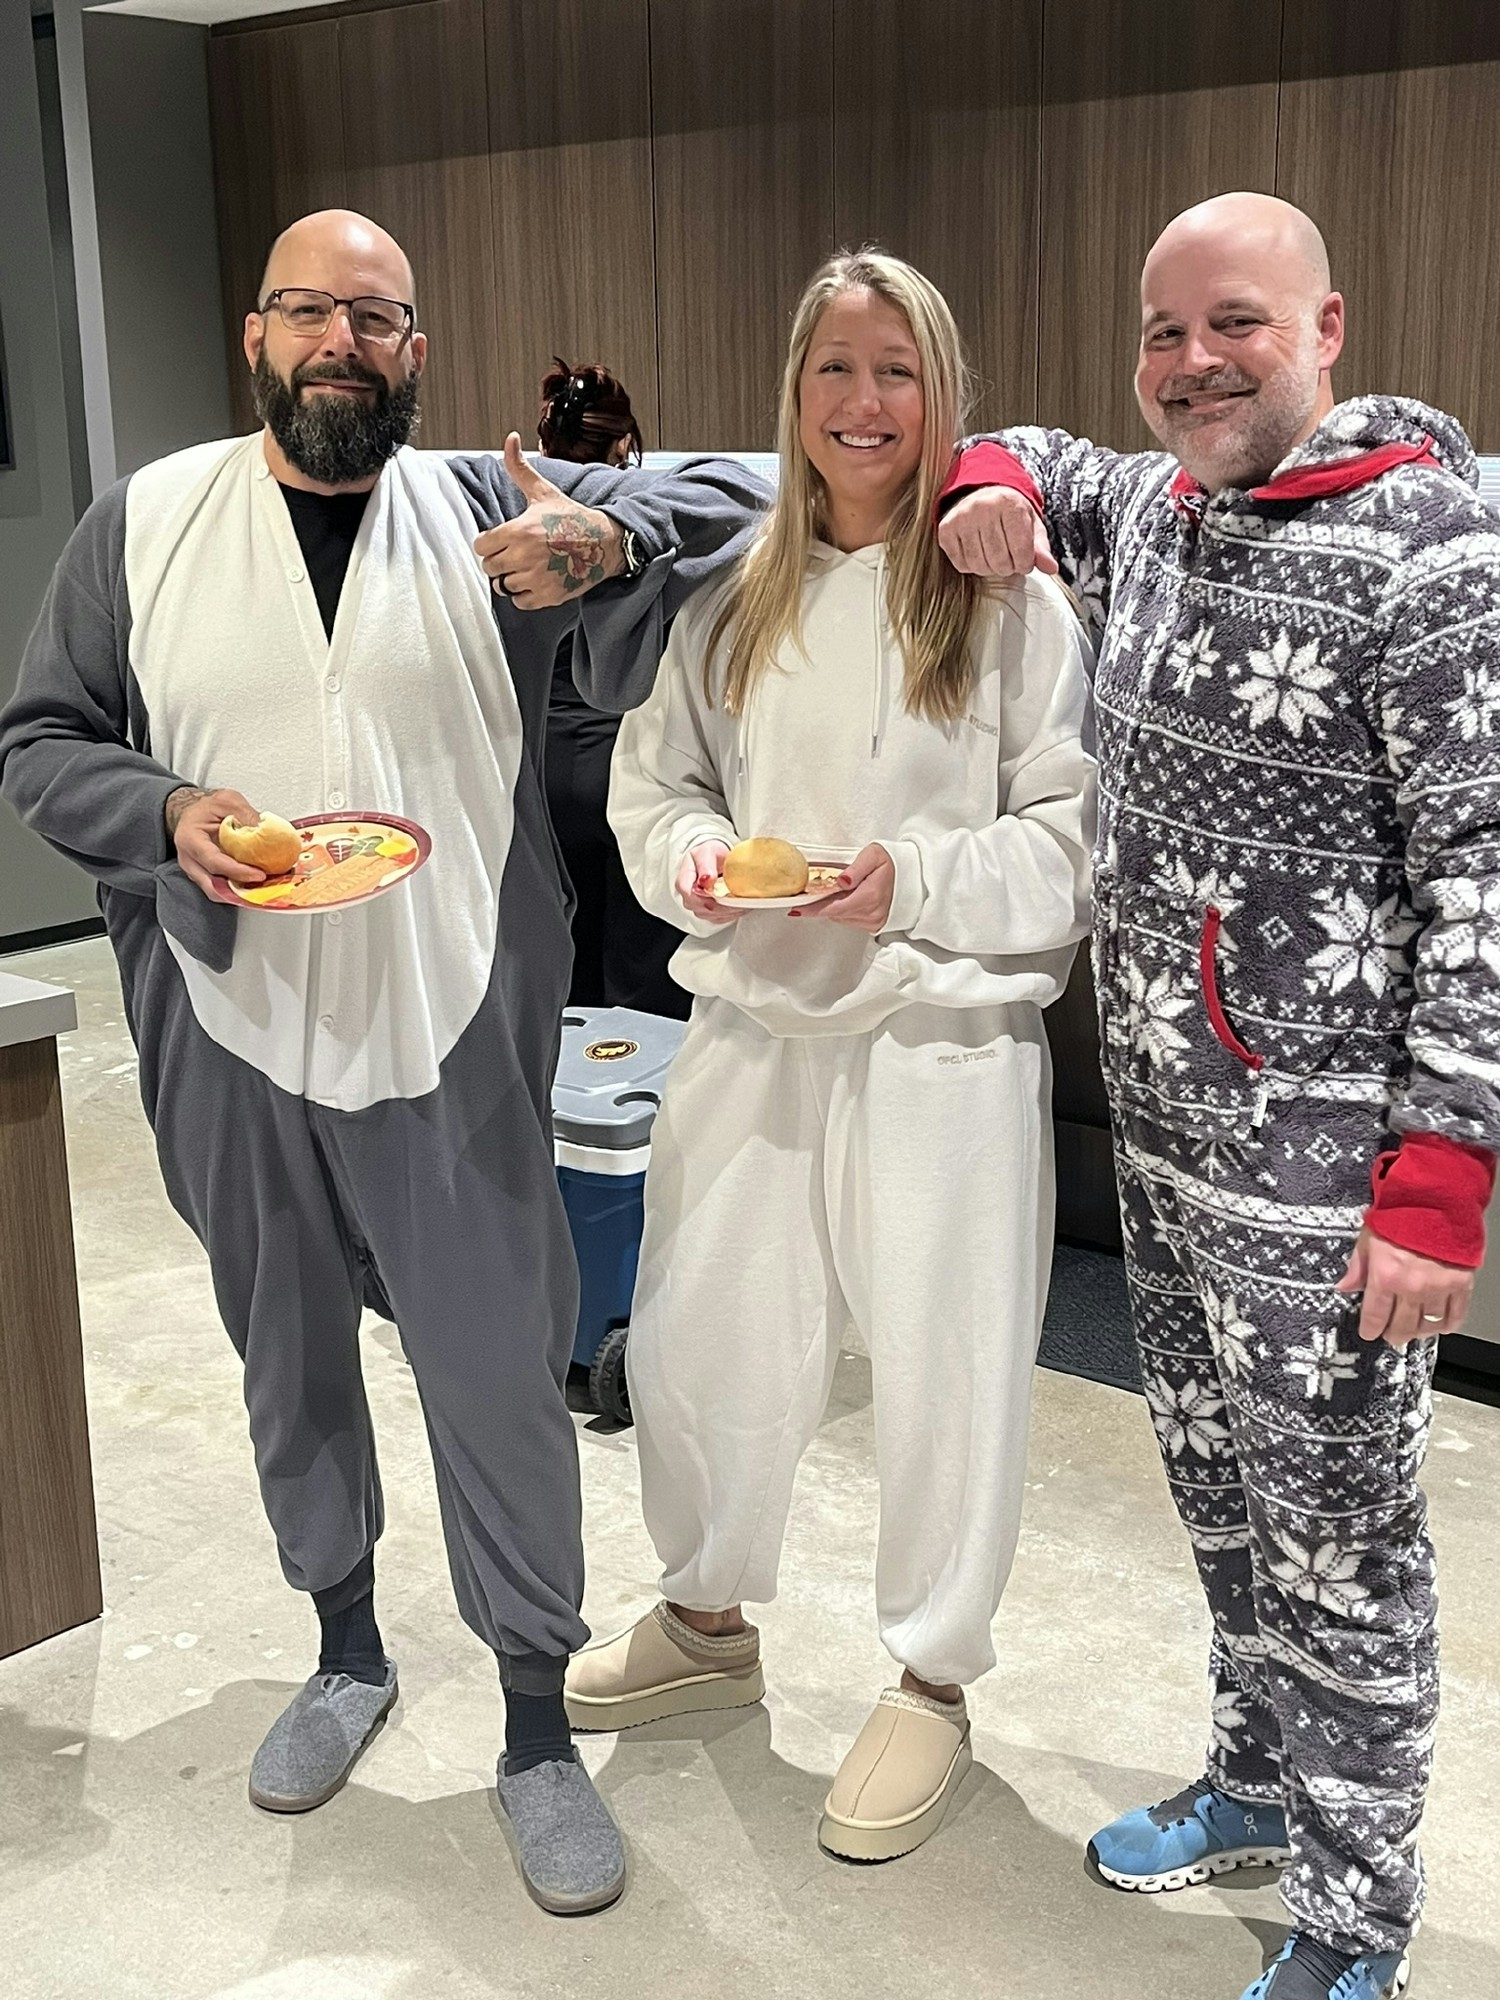 Houston team had a Christmas pajama party before our holiday break.